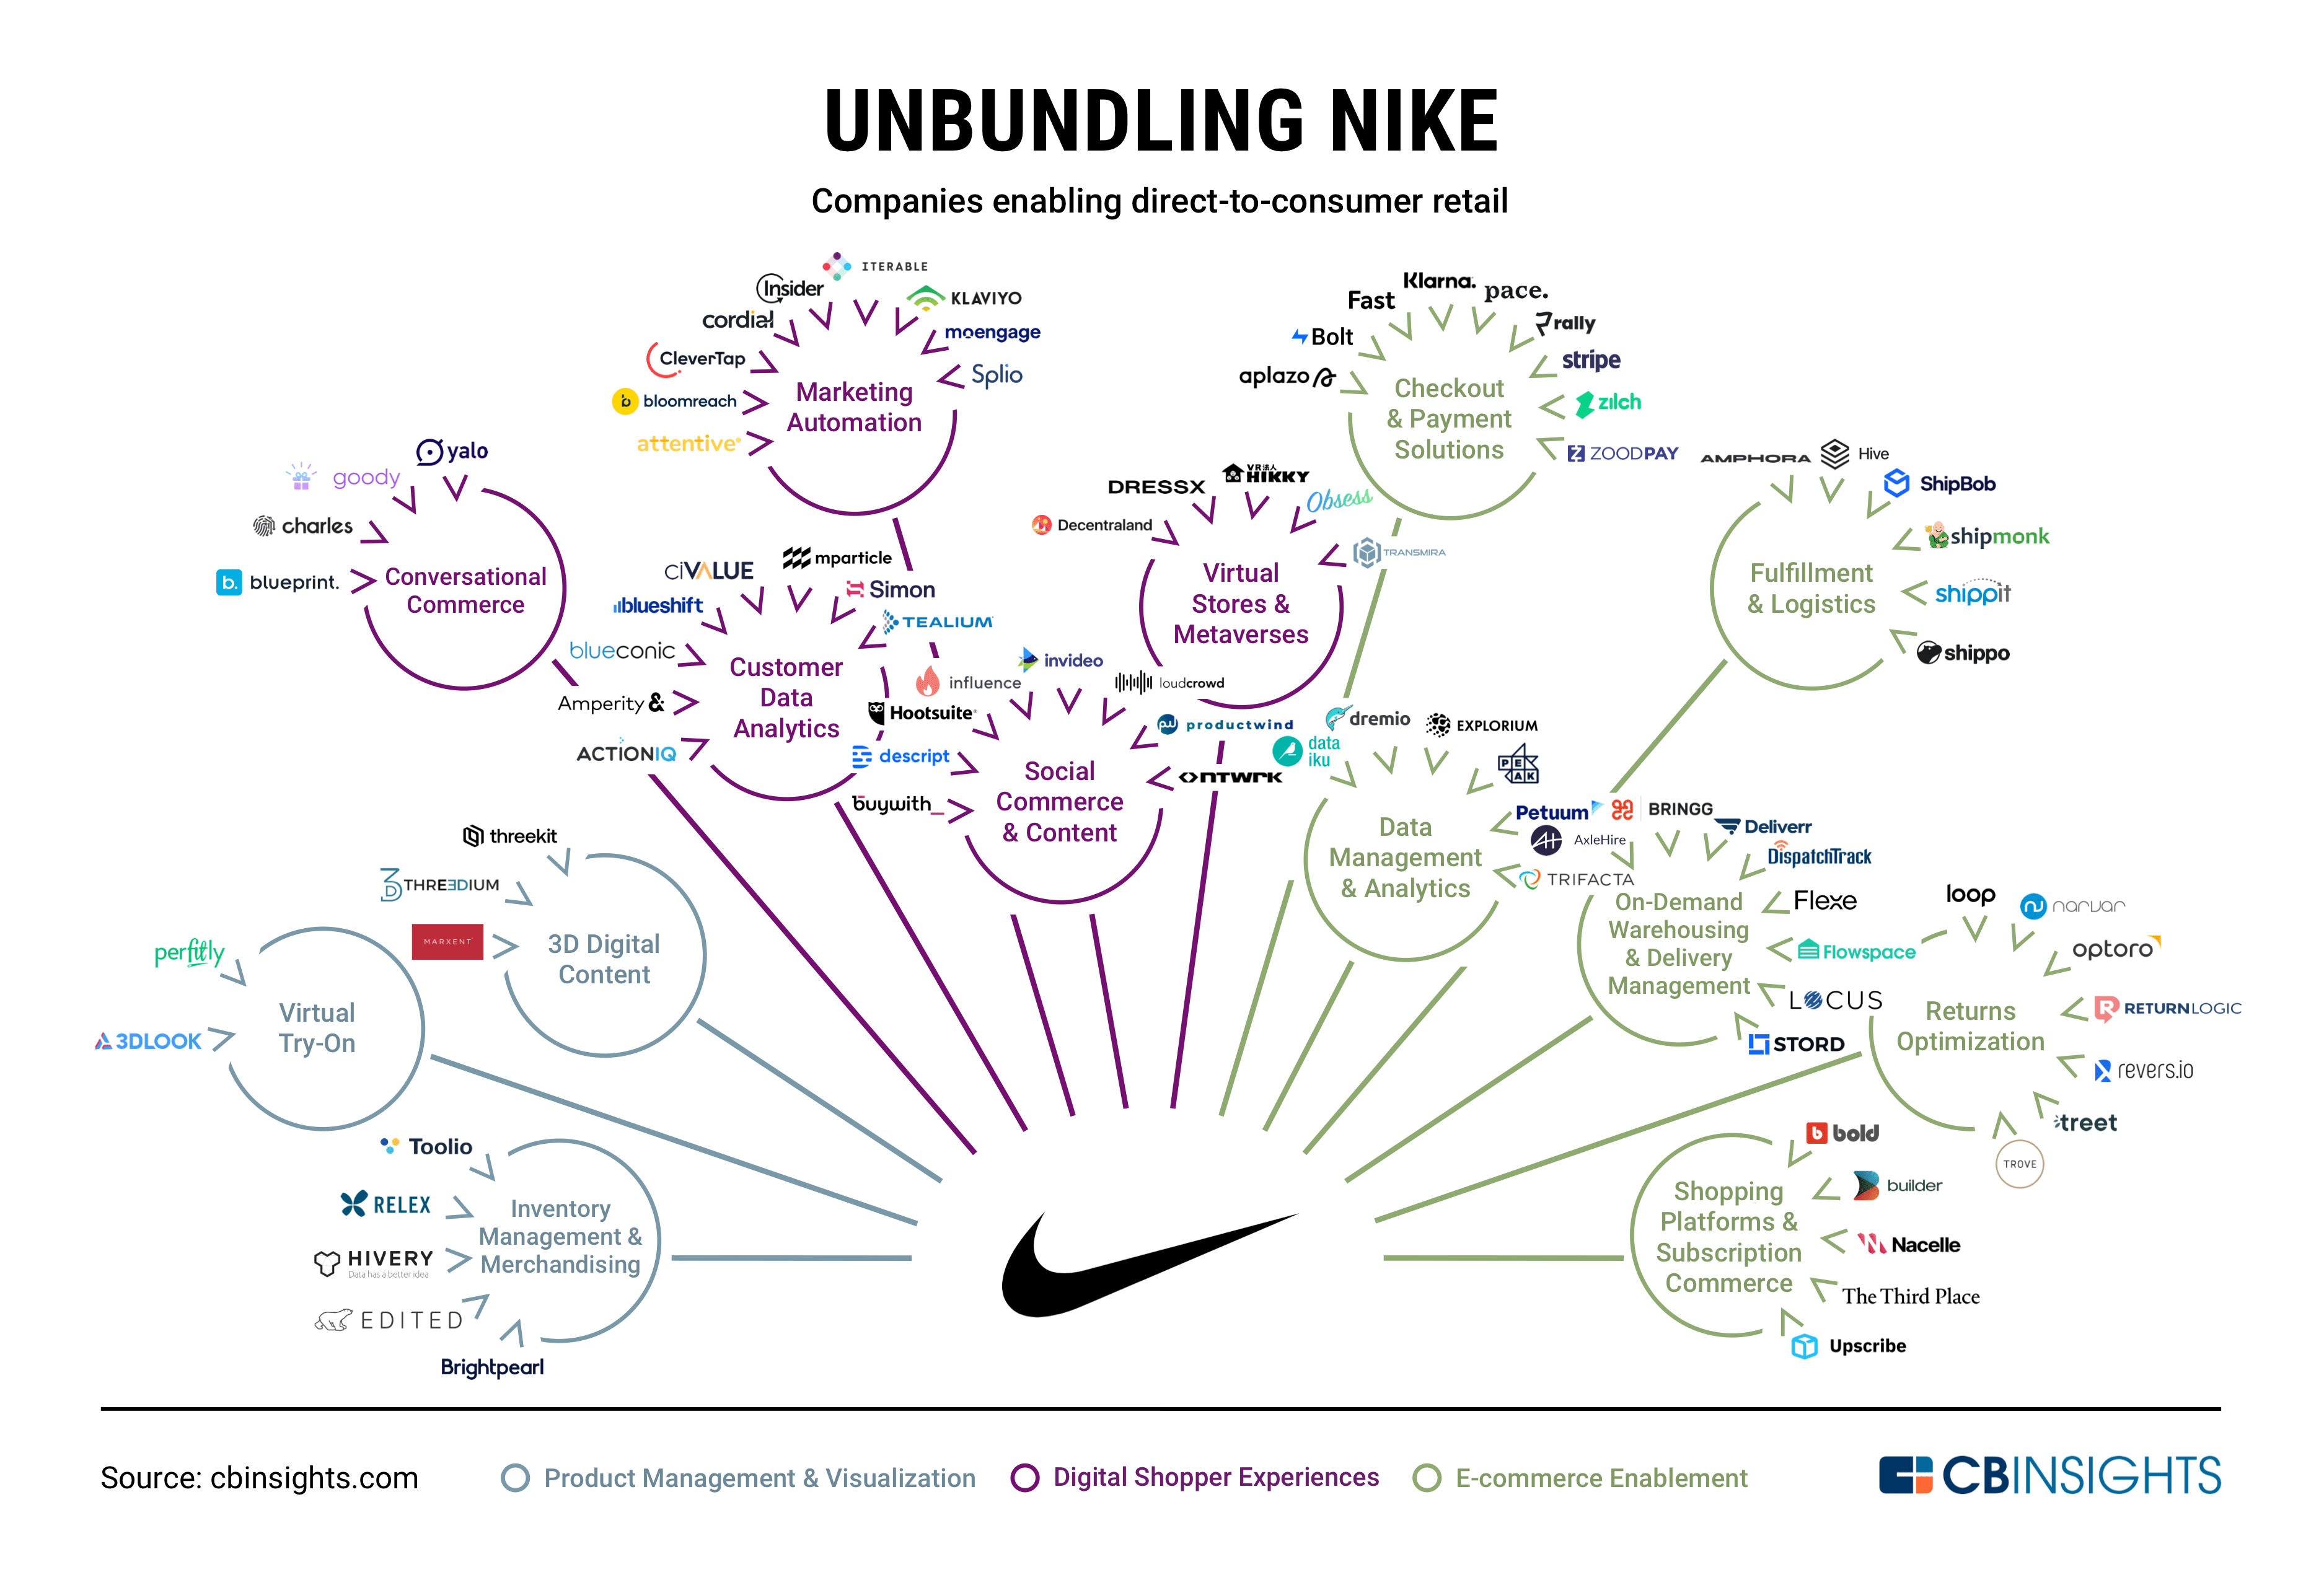 Unbundling Nike: How Direct-To-Consumer Is Being Disrupted - CB Insights Research